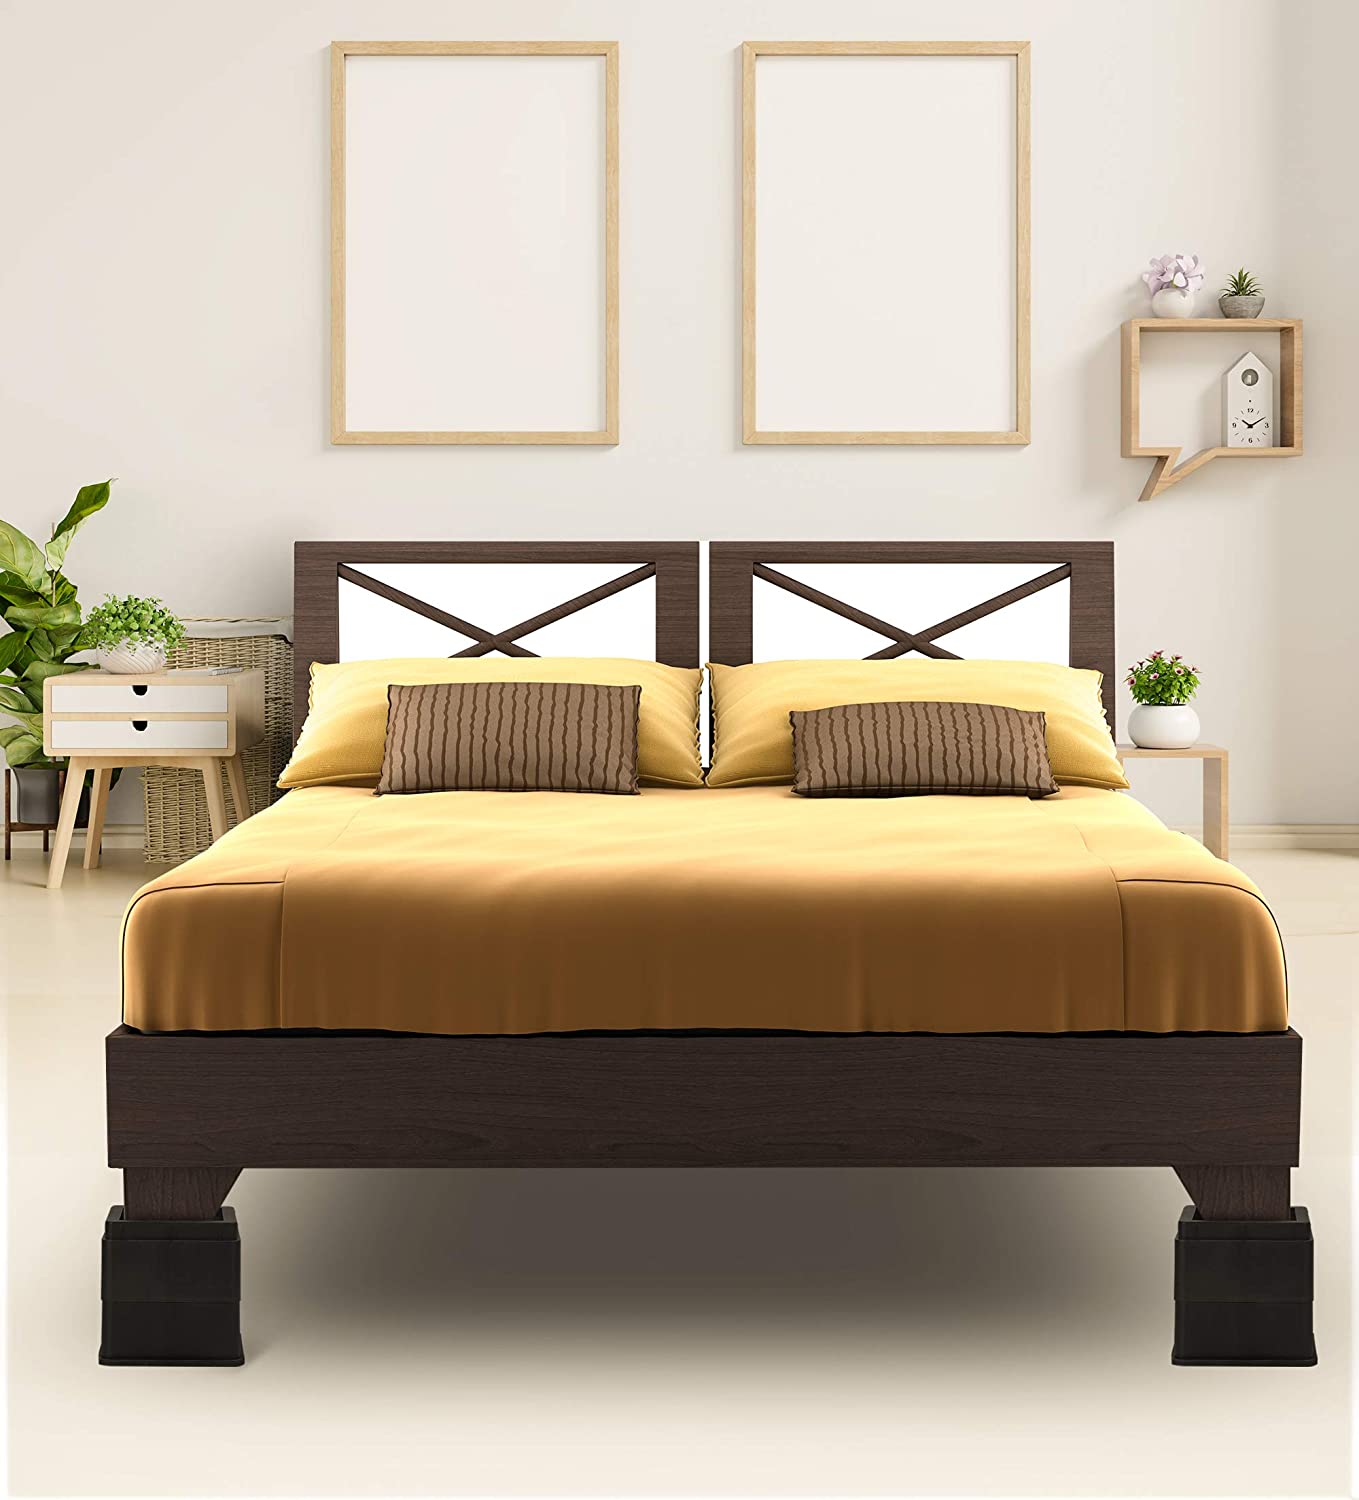 Utopia Bedding Furniture and Bed Risers